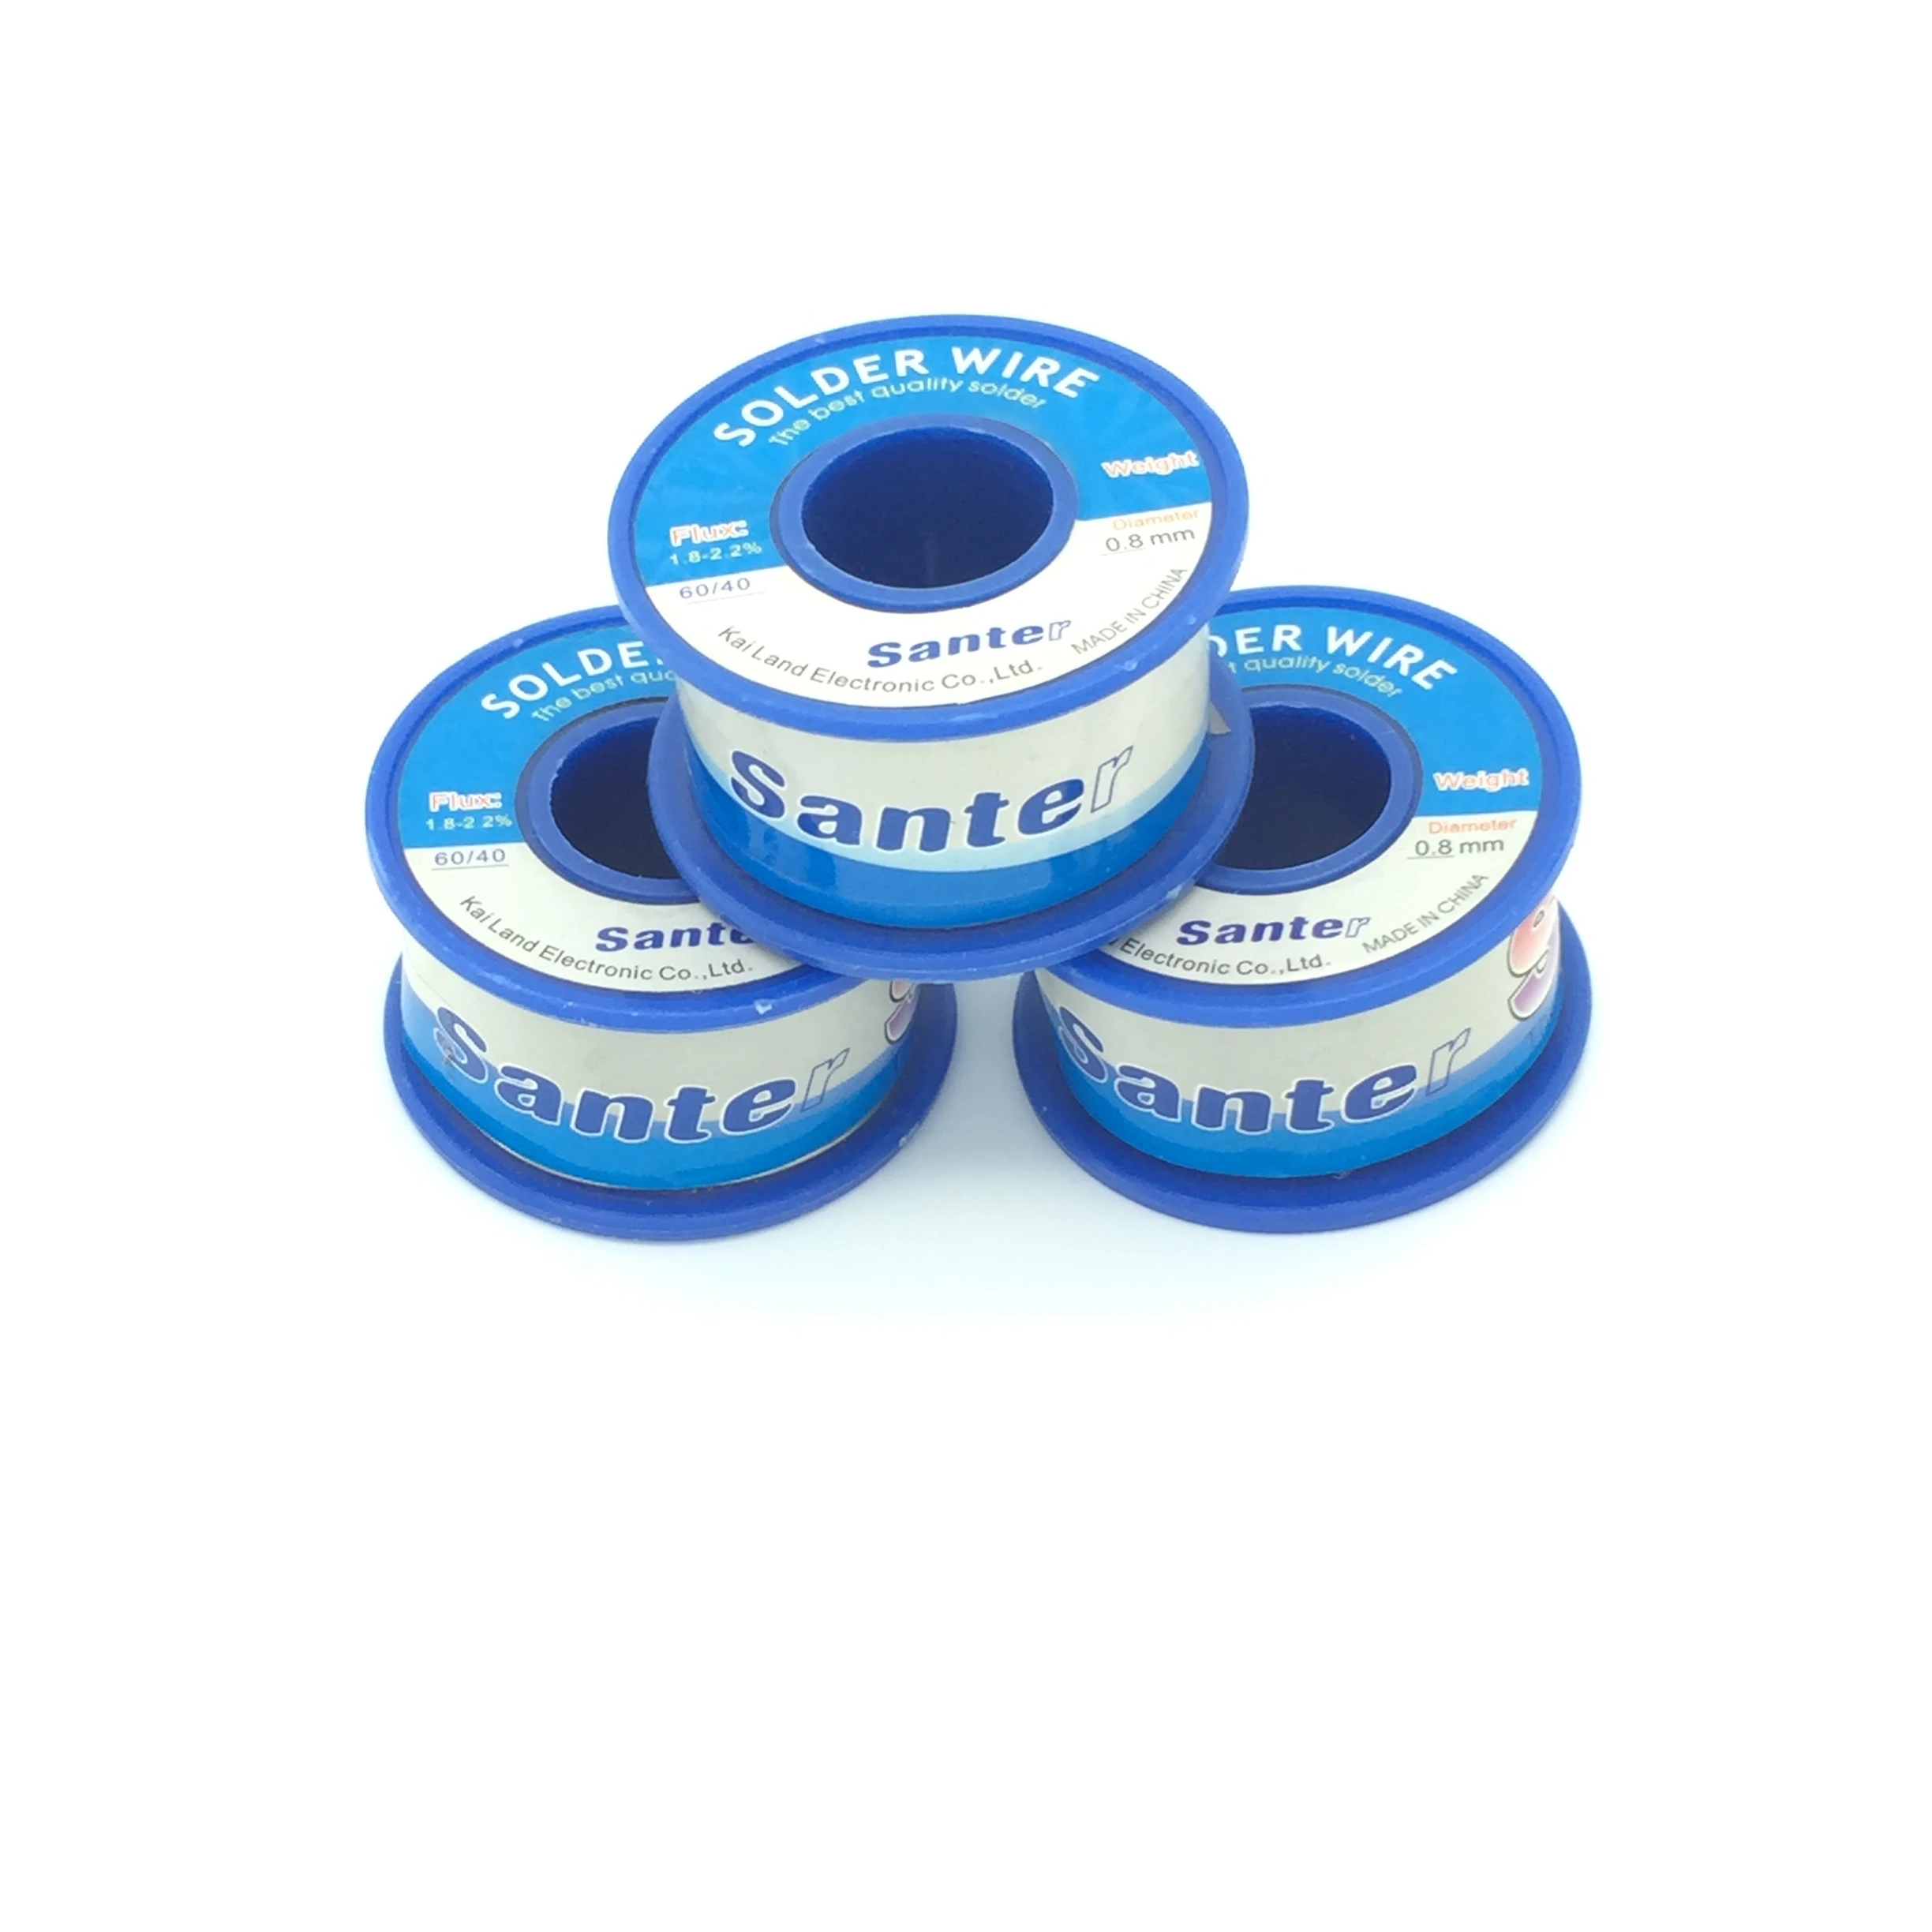 Santer 60/40 Hight quality No Cleaning Solder Wire  0.8mm  100g Tin Flux Rosin Activated Cored Welding Wire